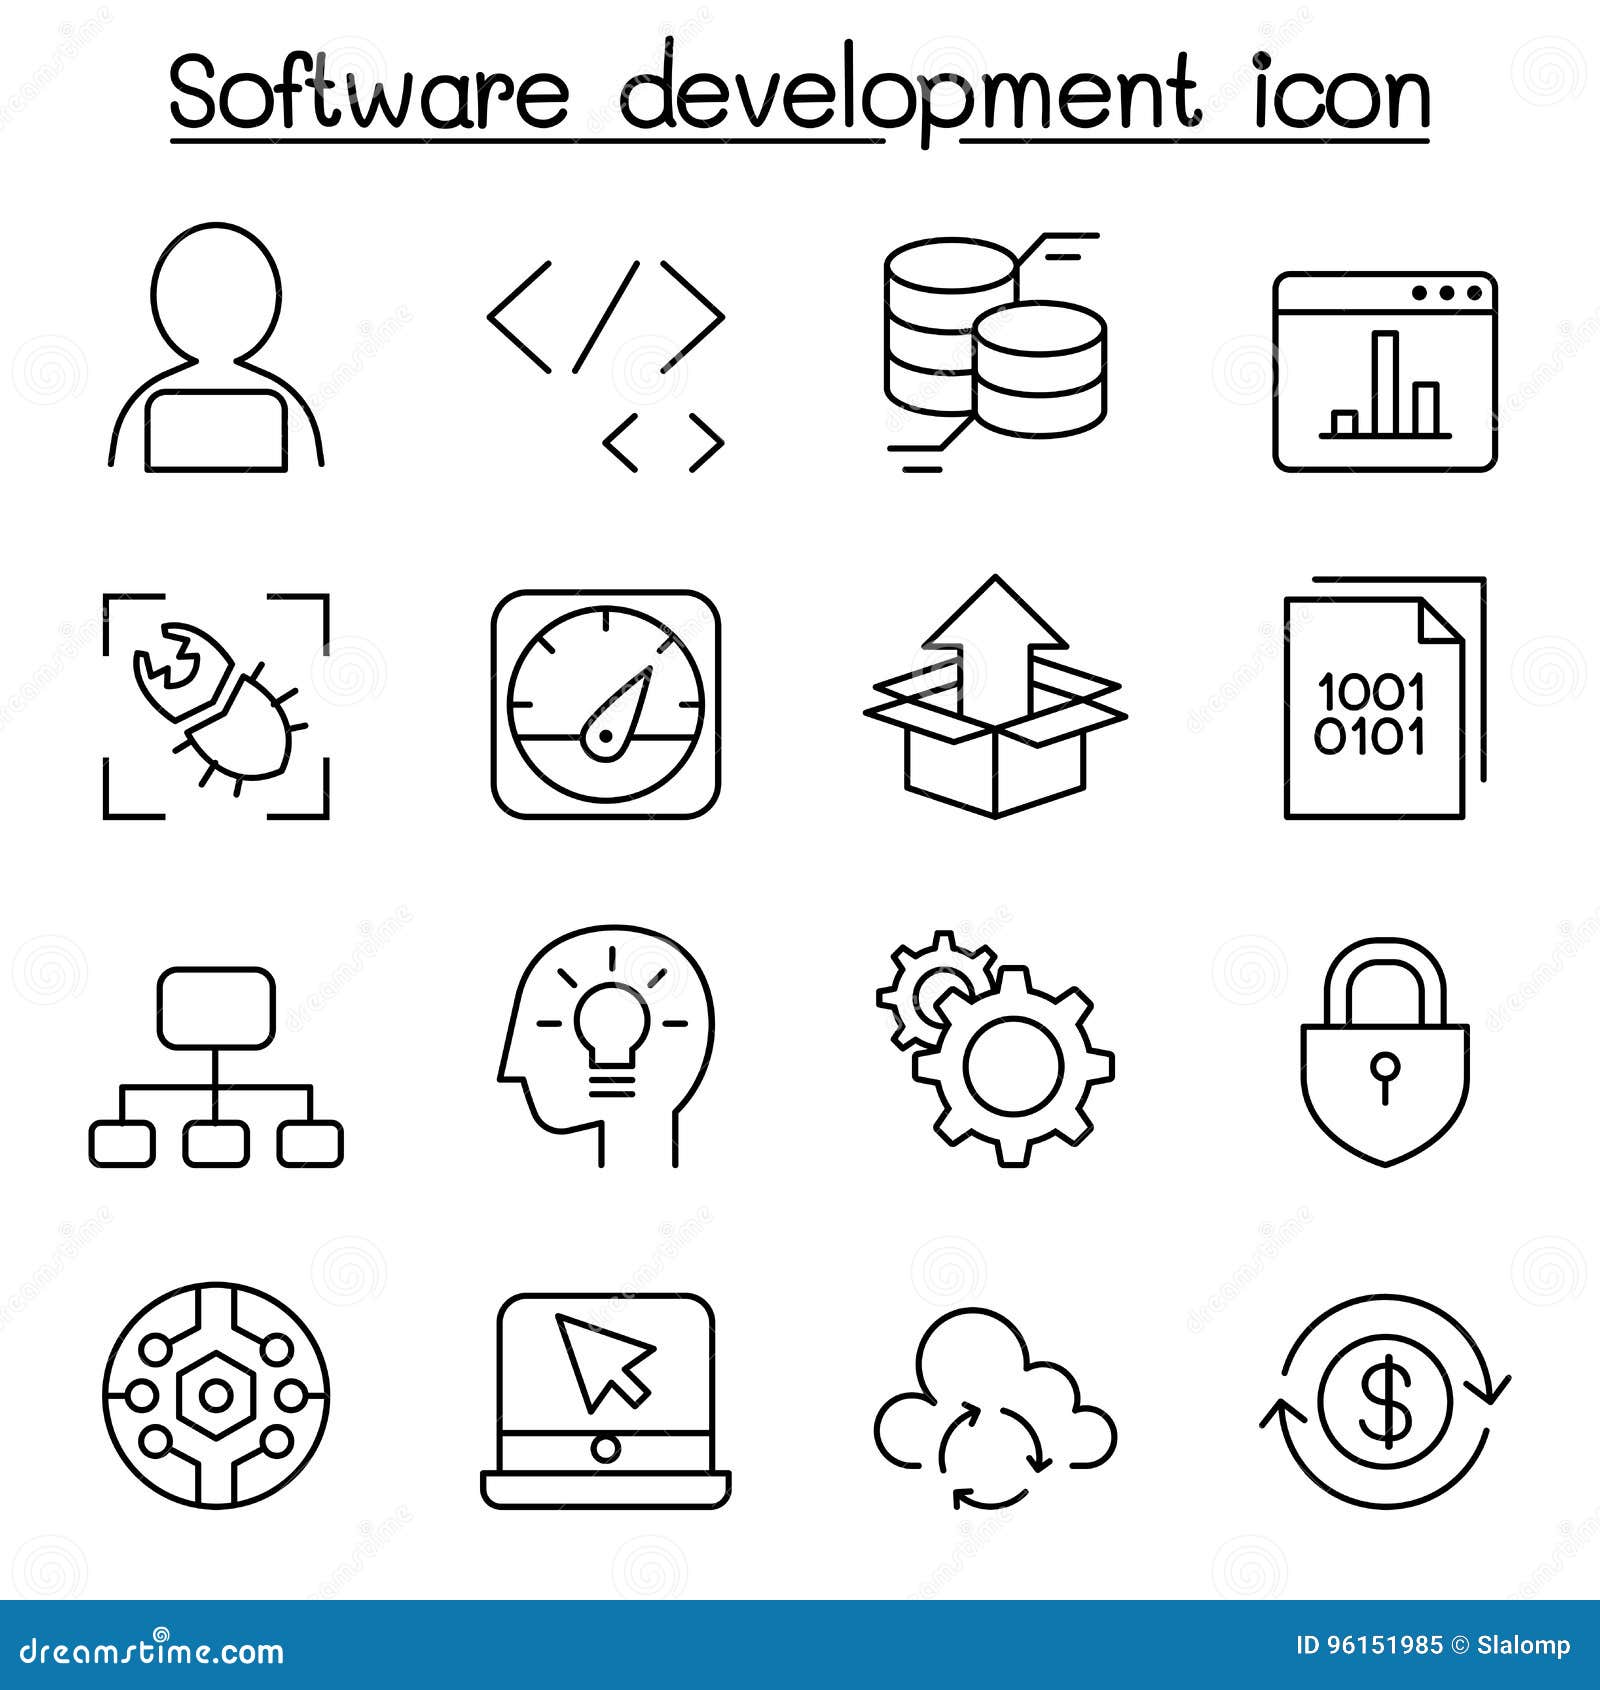 software development icon set in thin line style